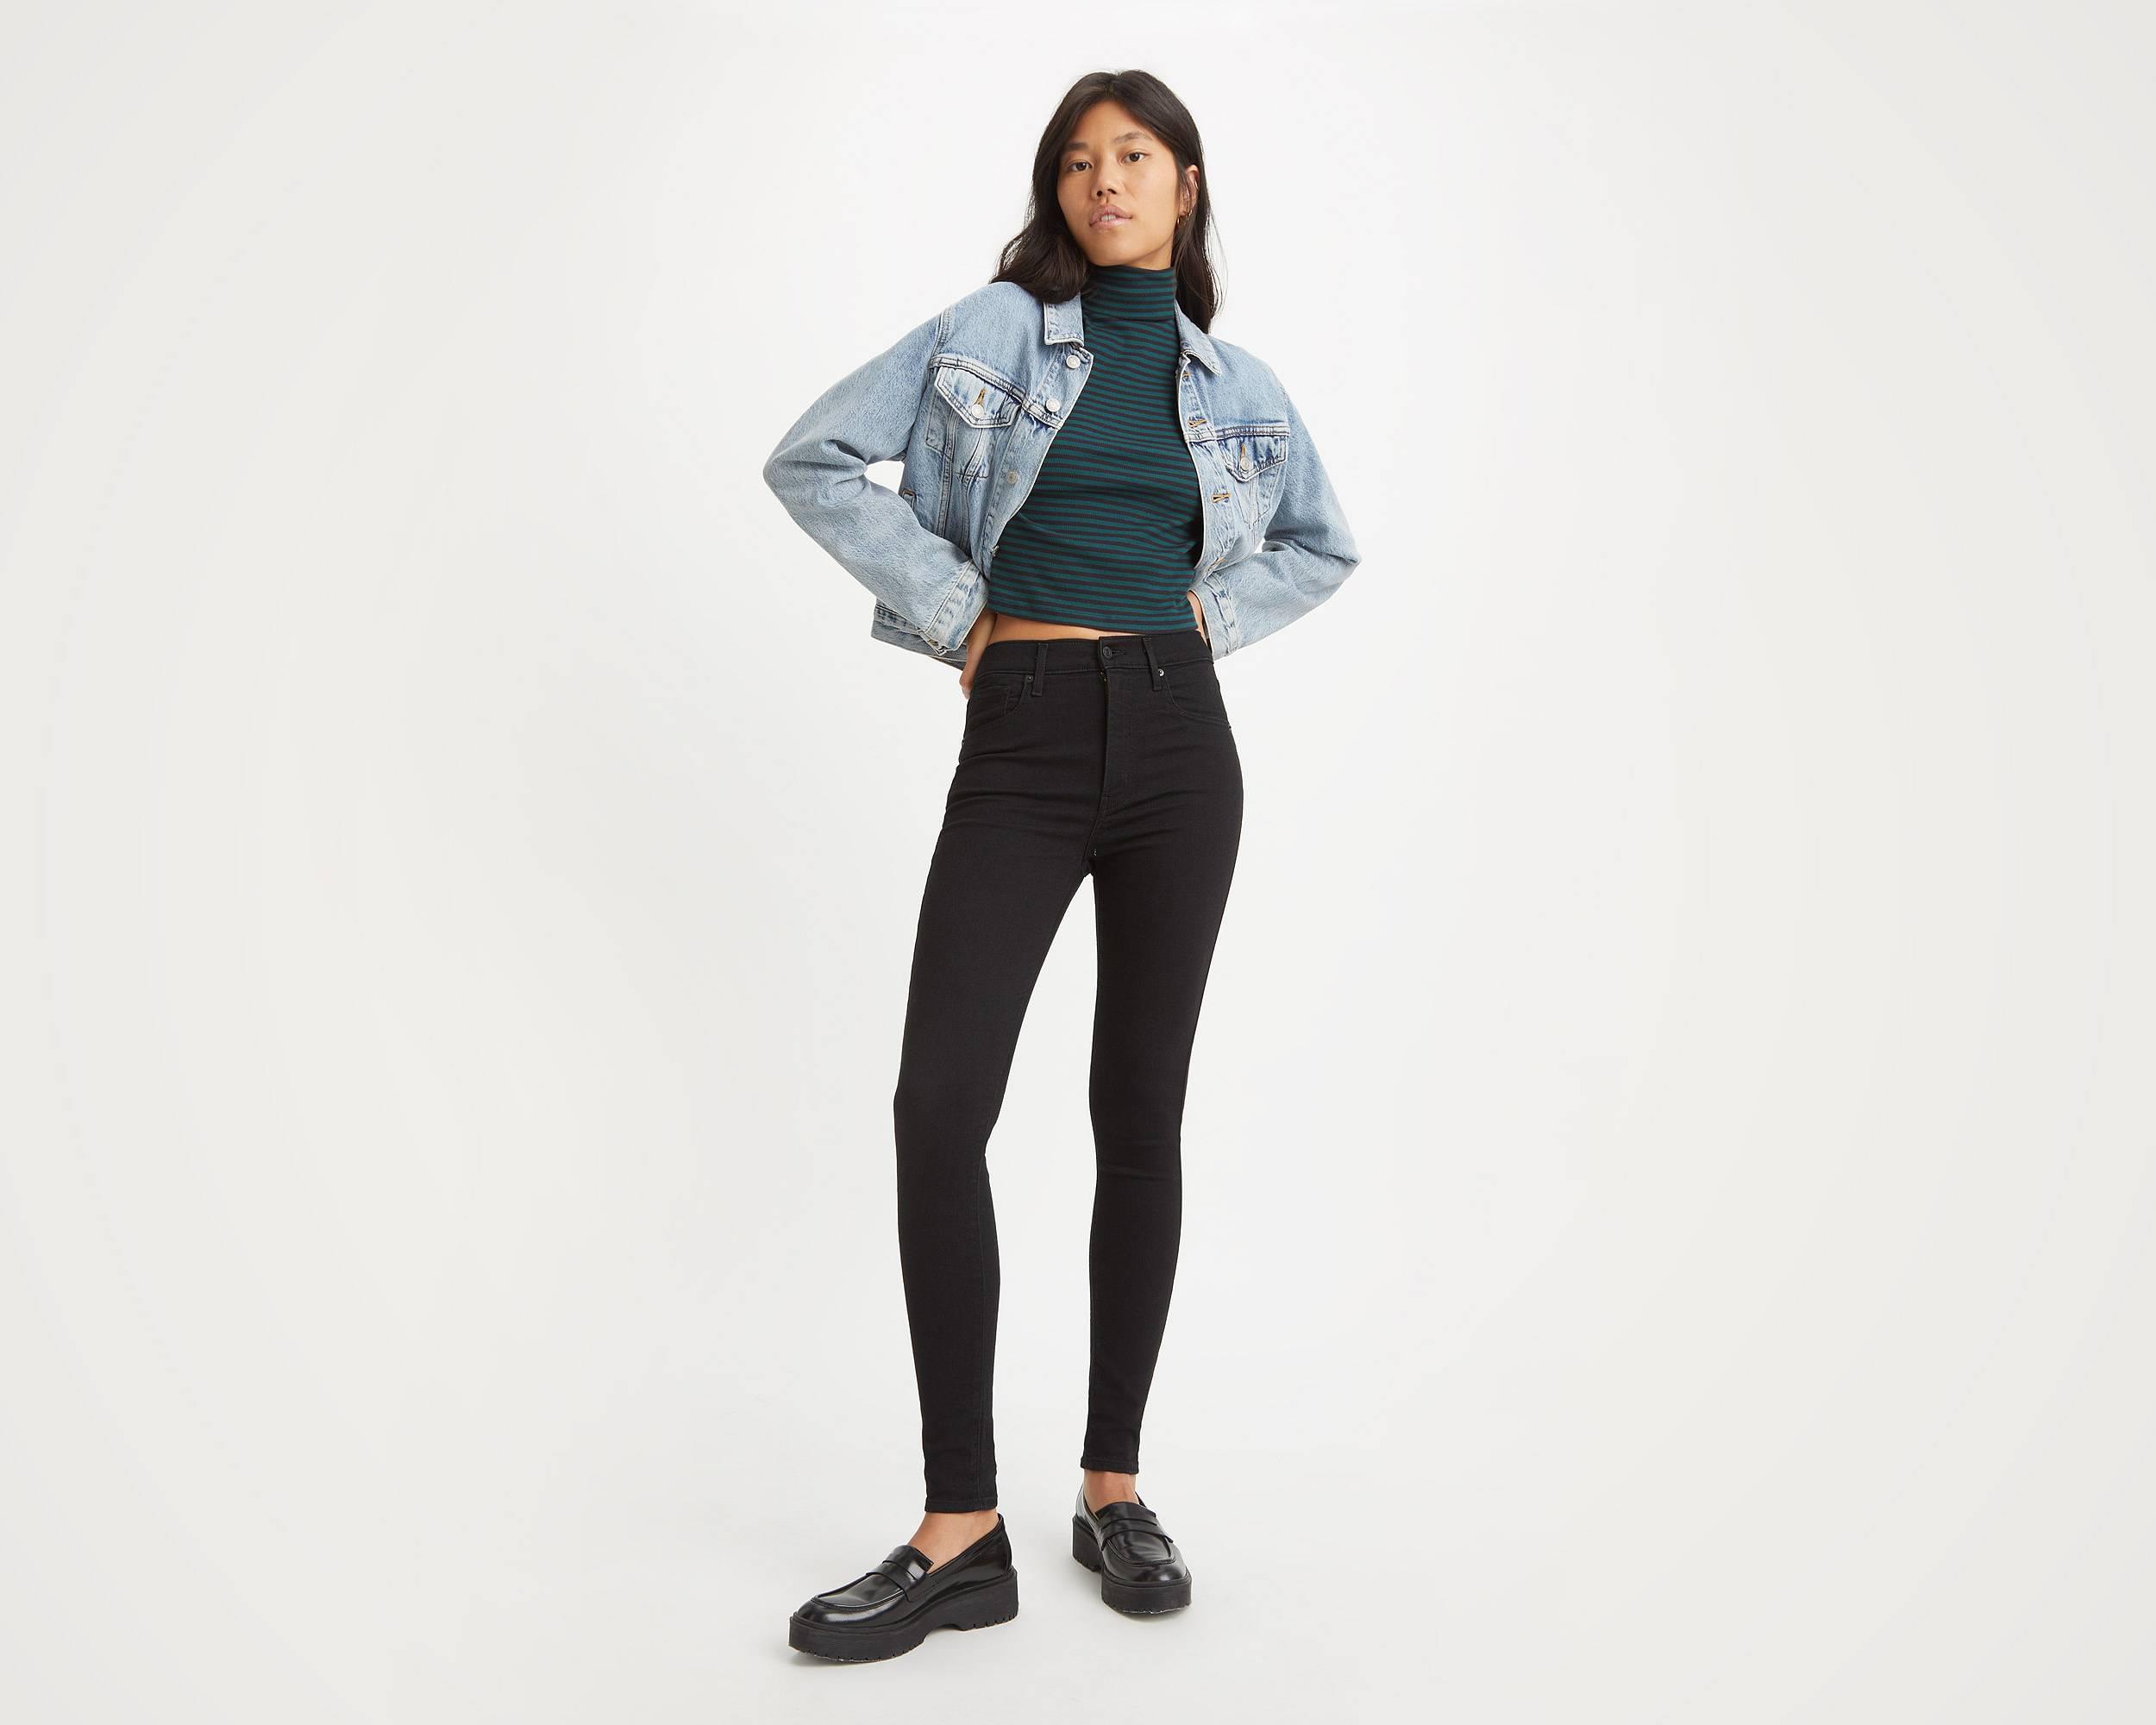 Mile High Super Skinny Jeans - Levi's Jeans, Jackets & Clothing